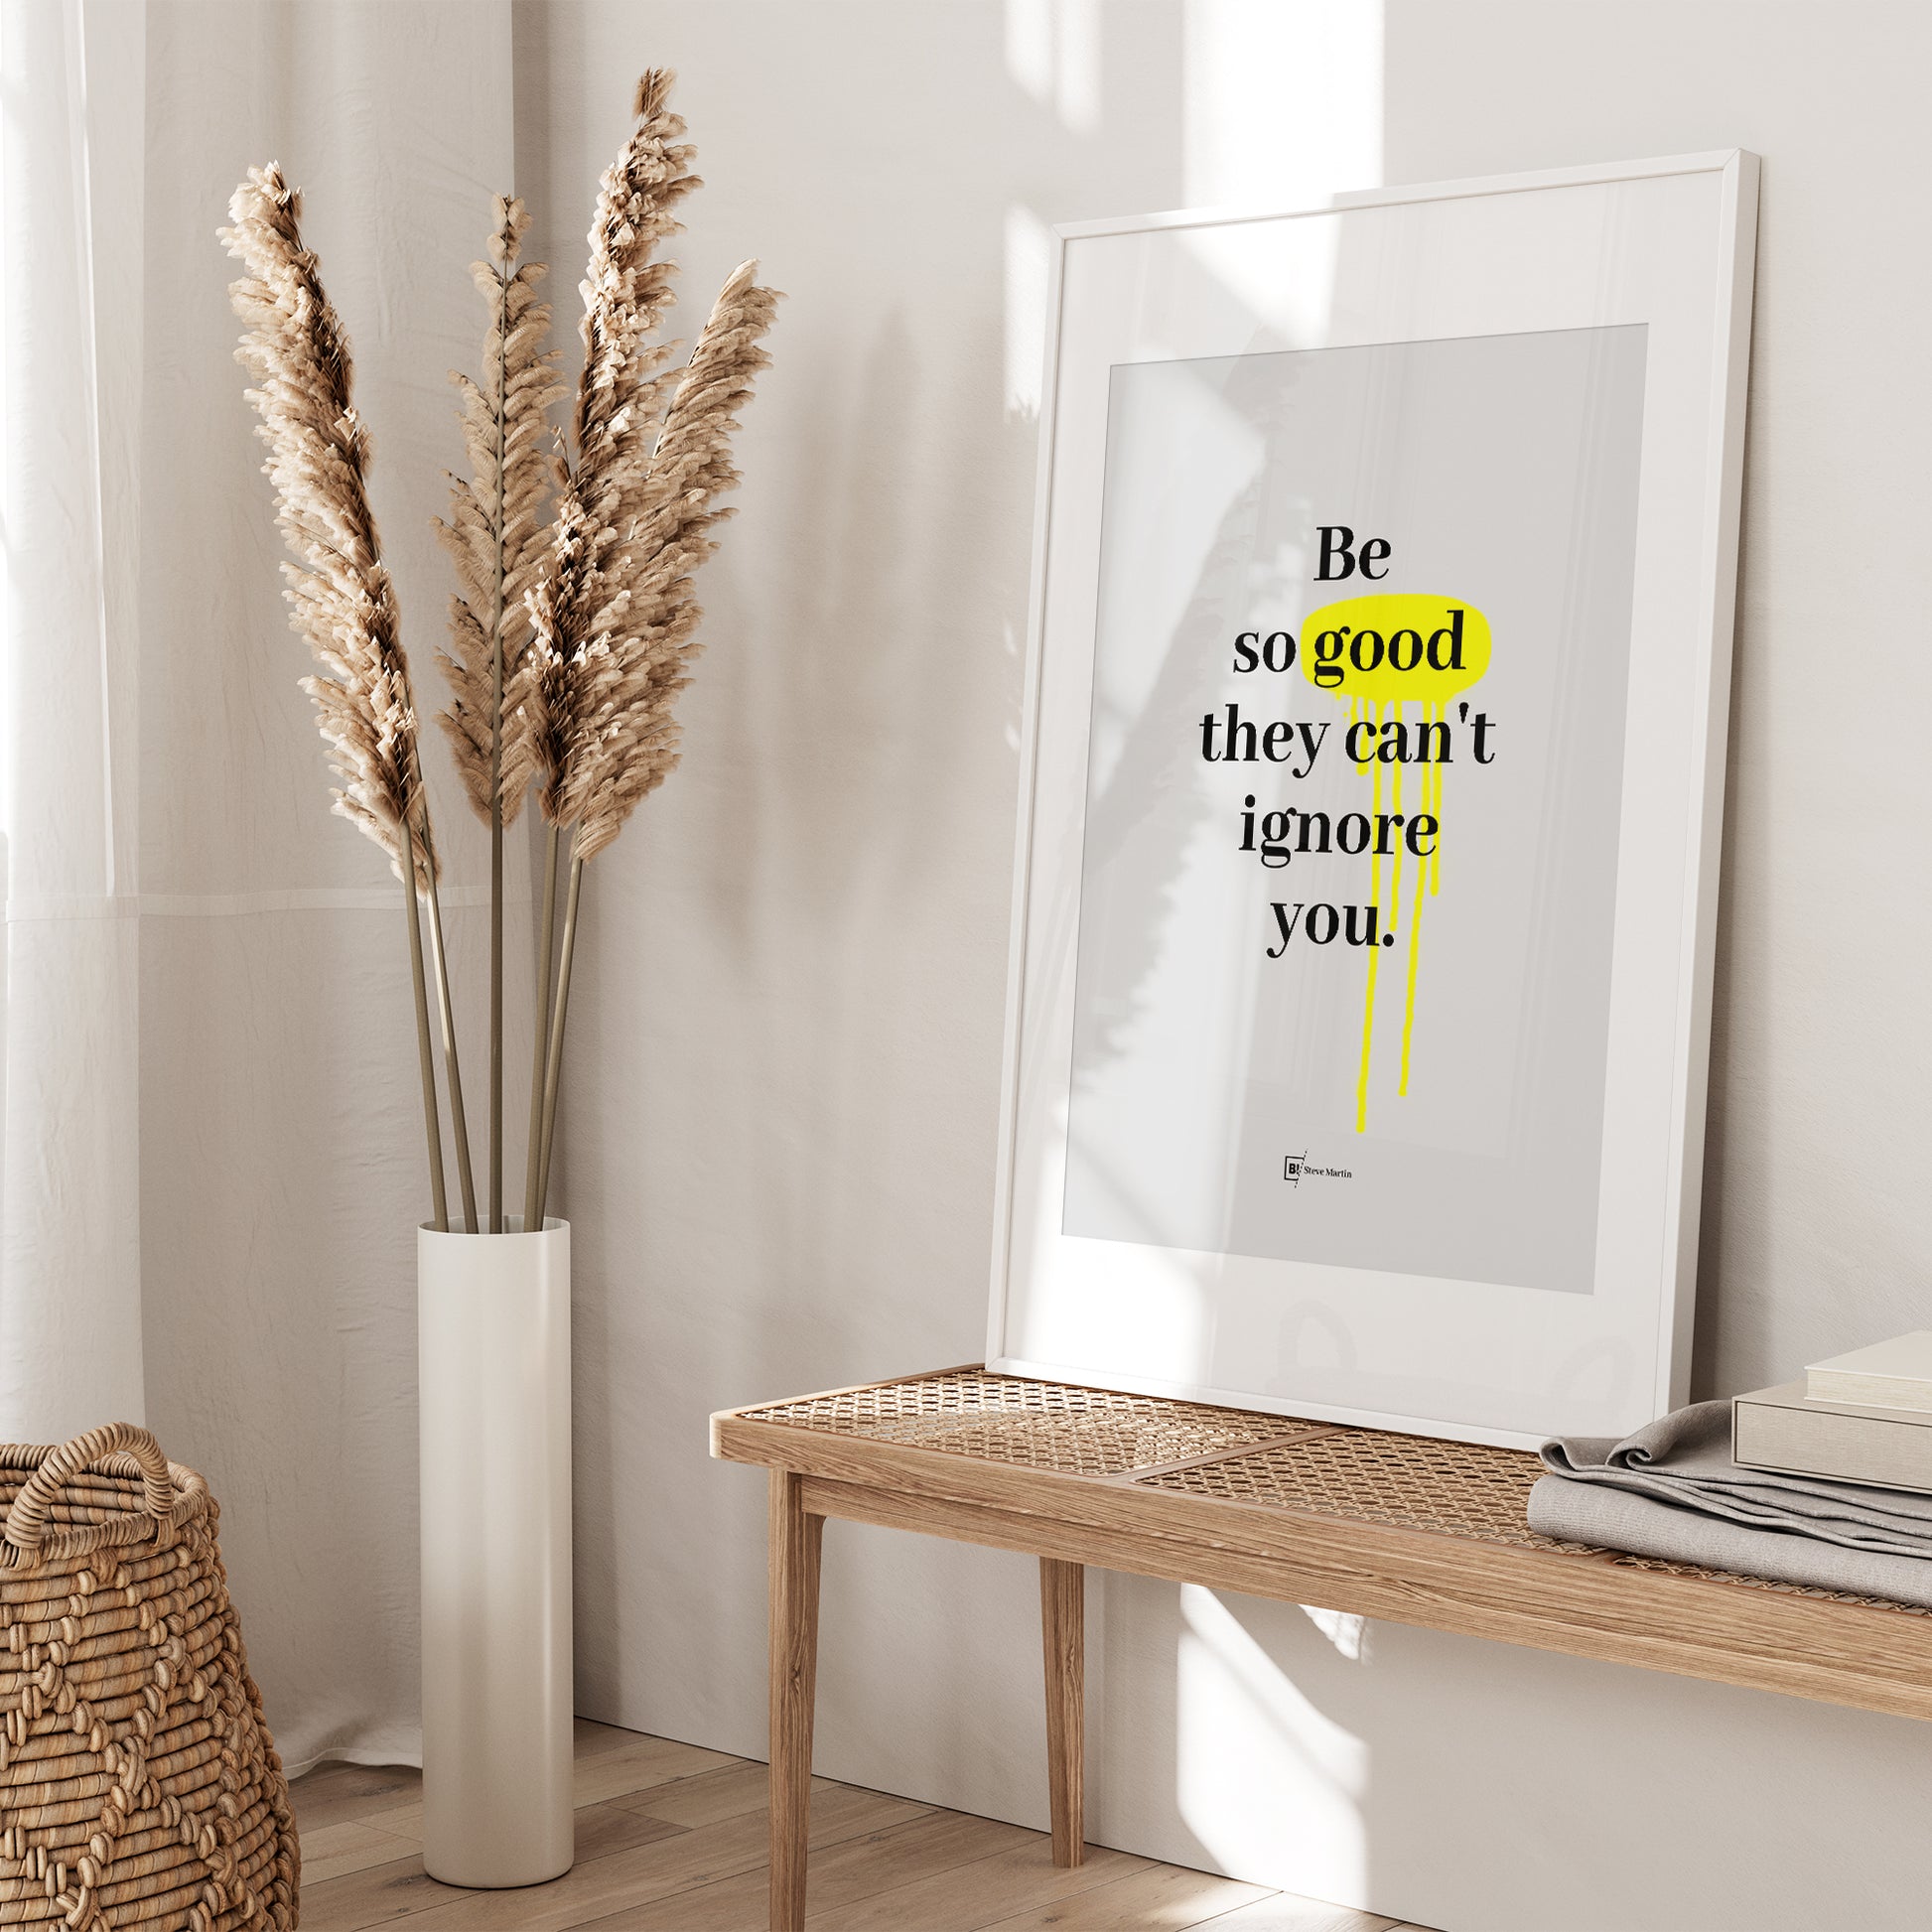 Be inspired by Steve Martin's famous "Be so good they can't ignore you" quote art print. This artwork was printed using the giclée process on archival acid-free paper and is presented in a white frame with passe-partout that captures its timeless beauty in every detail.